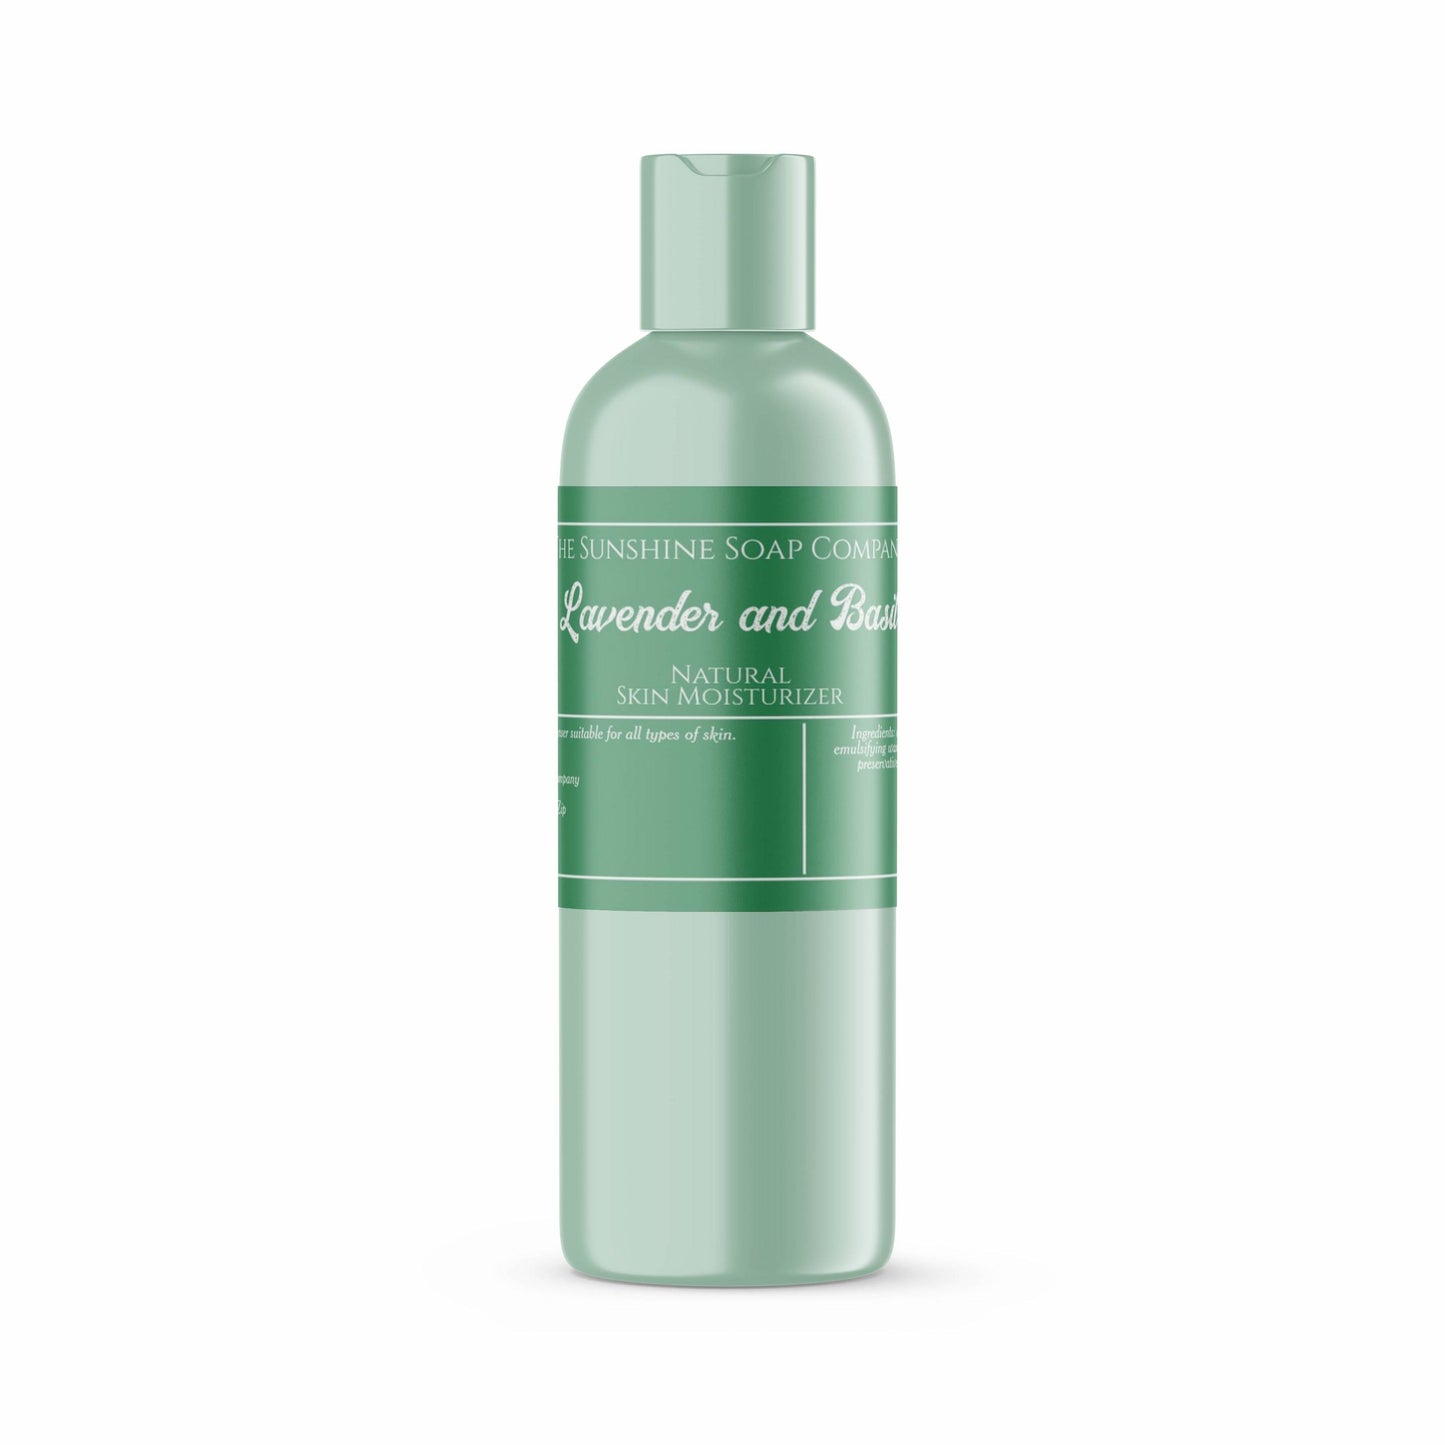 Green and white cosmetics jar label